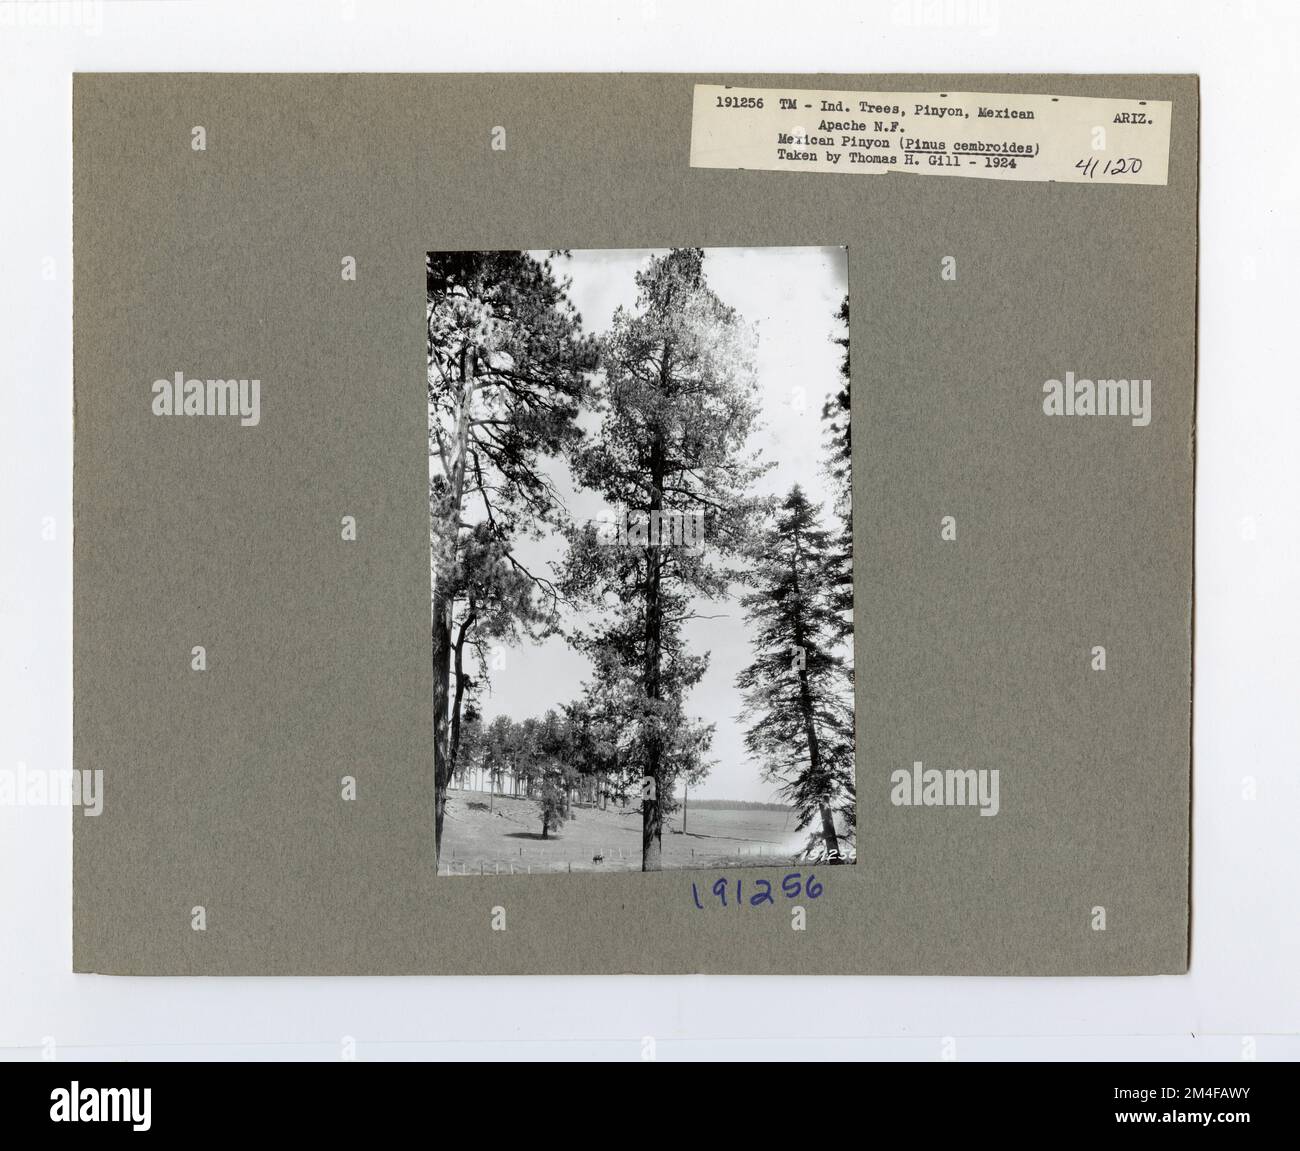 Tree Identification - Pine, Mexican Pinyon. Photographs Relating to National Forests, Resource Management Practices, Personnel, and Cultural and Economic History Stock Photo